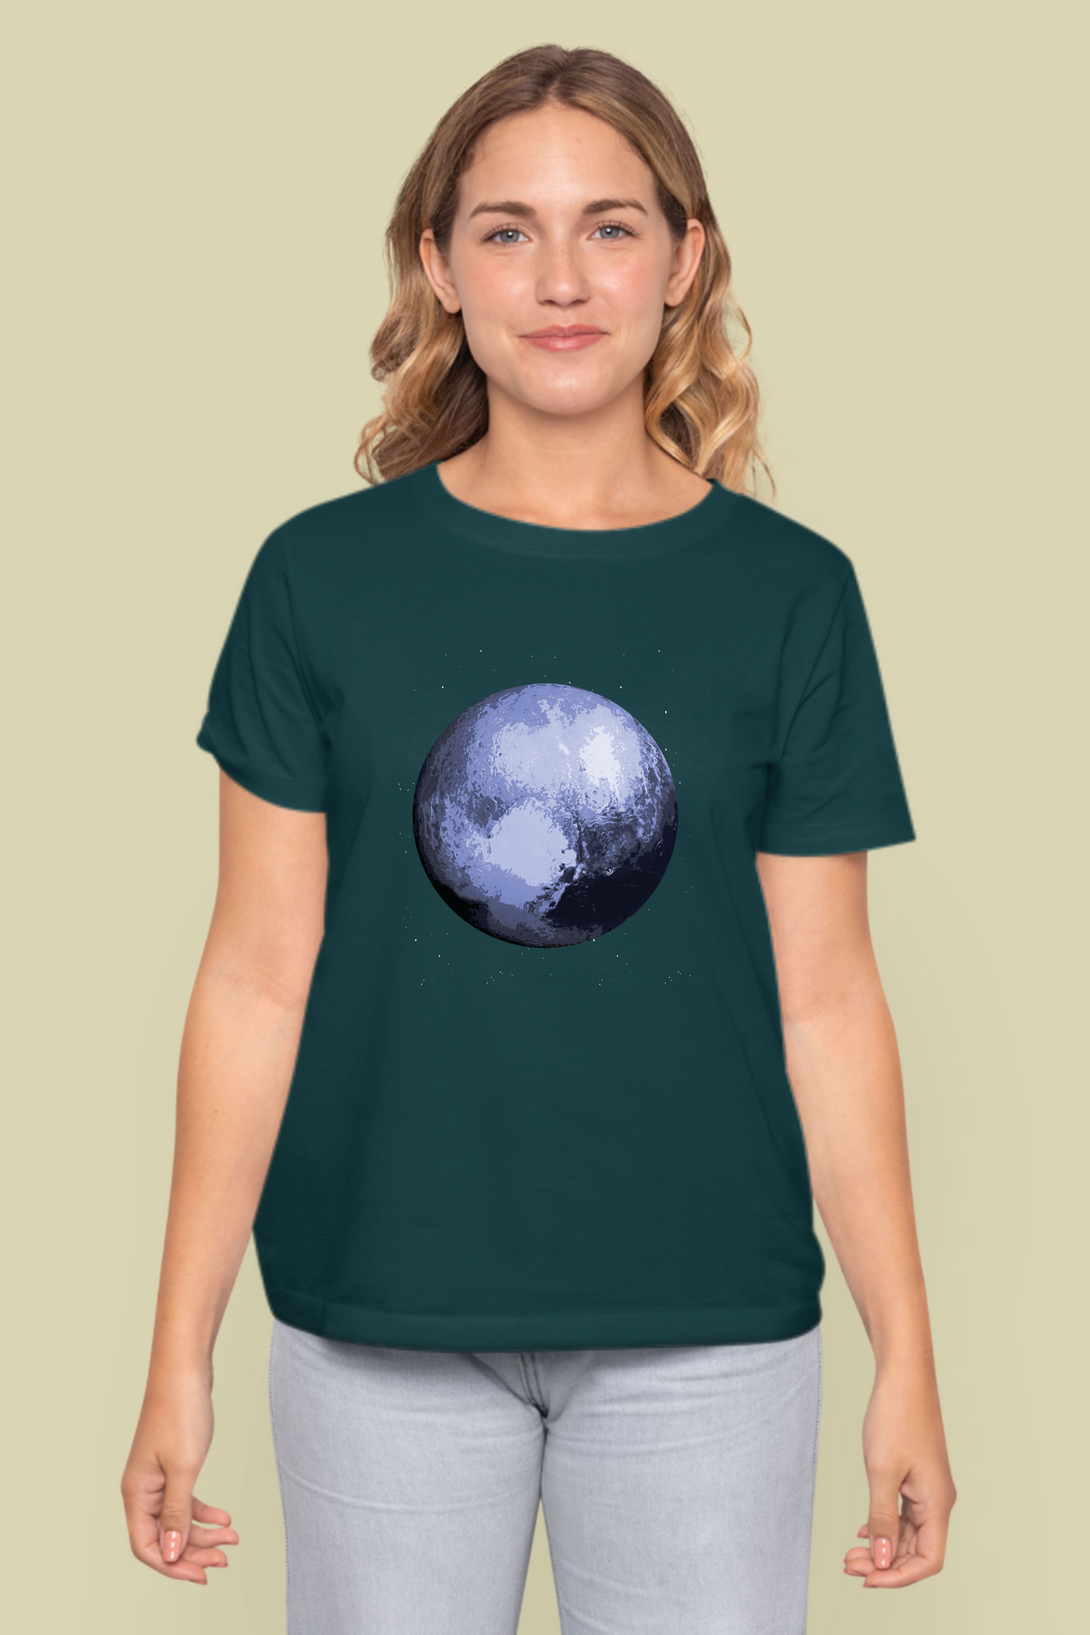 Blue Planet Printed T-Shirt For Women - WowWaves - 5